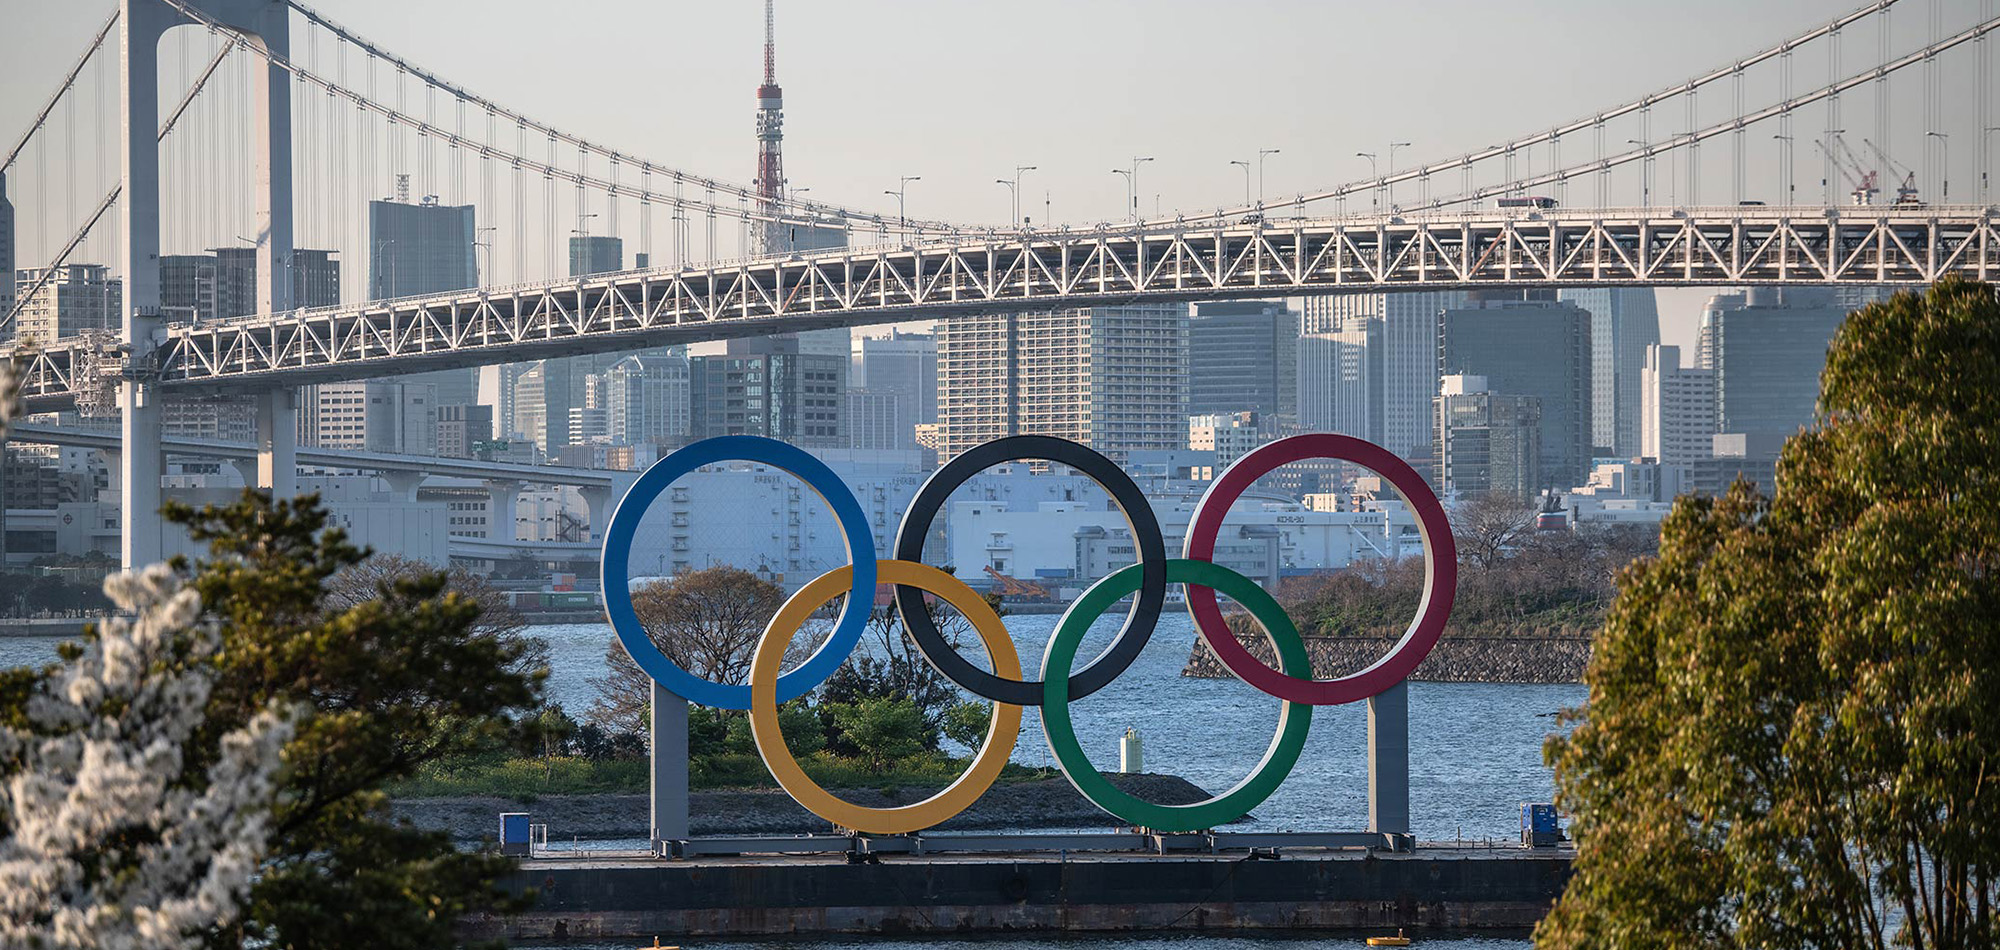 Tokyo 2020 chief rebuffs higher reported Games costs